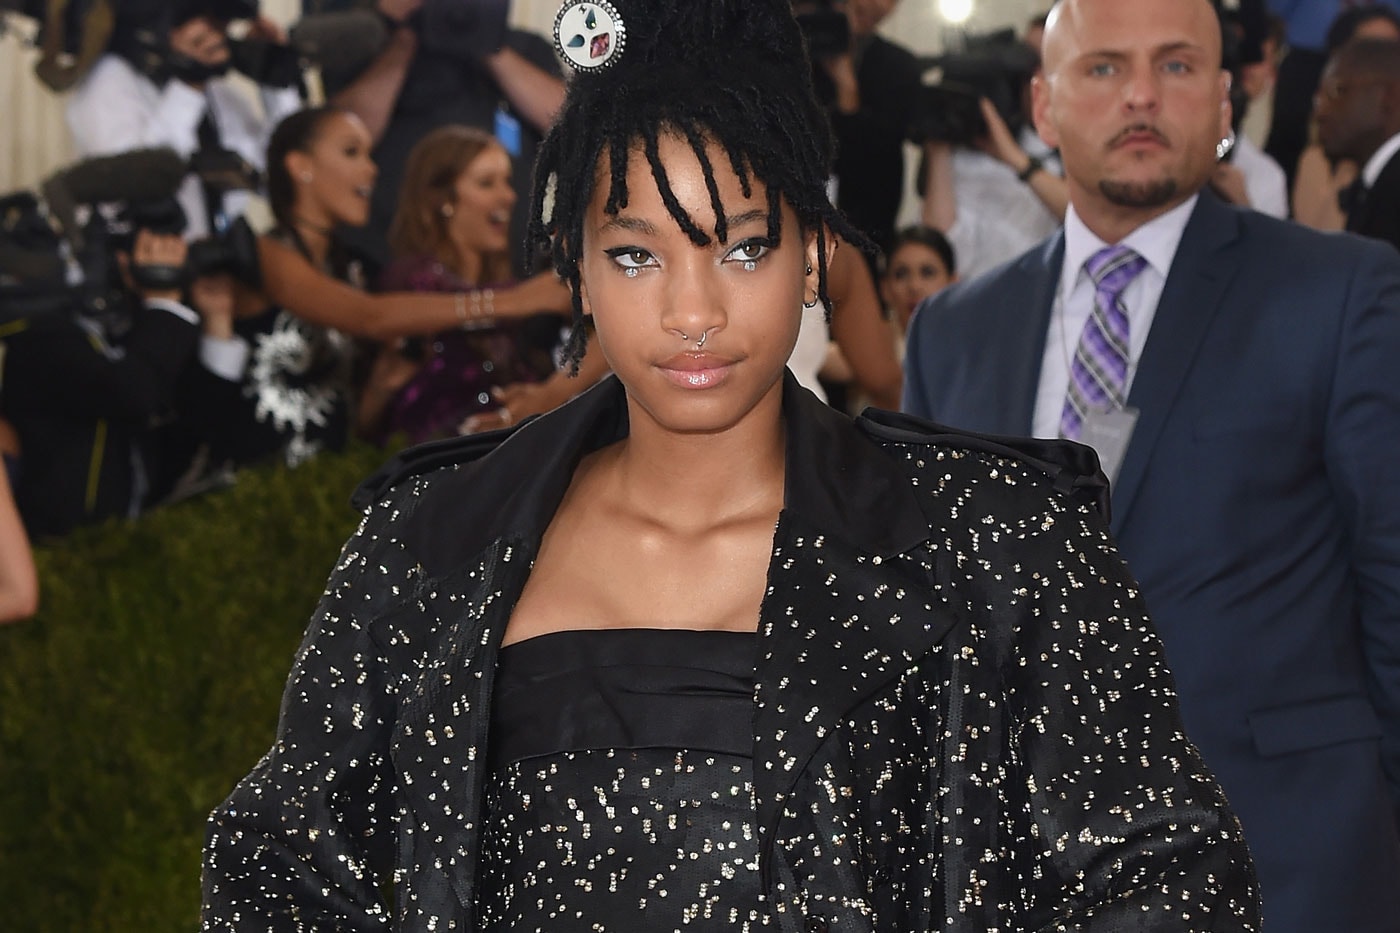 Willow Smith Shares New Song "November 9th"